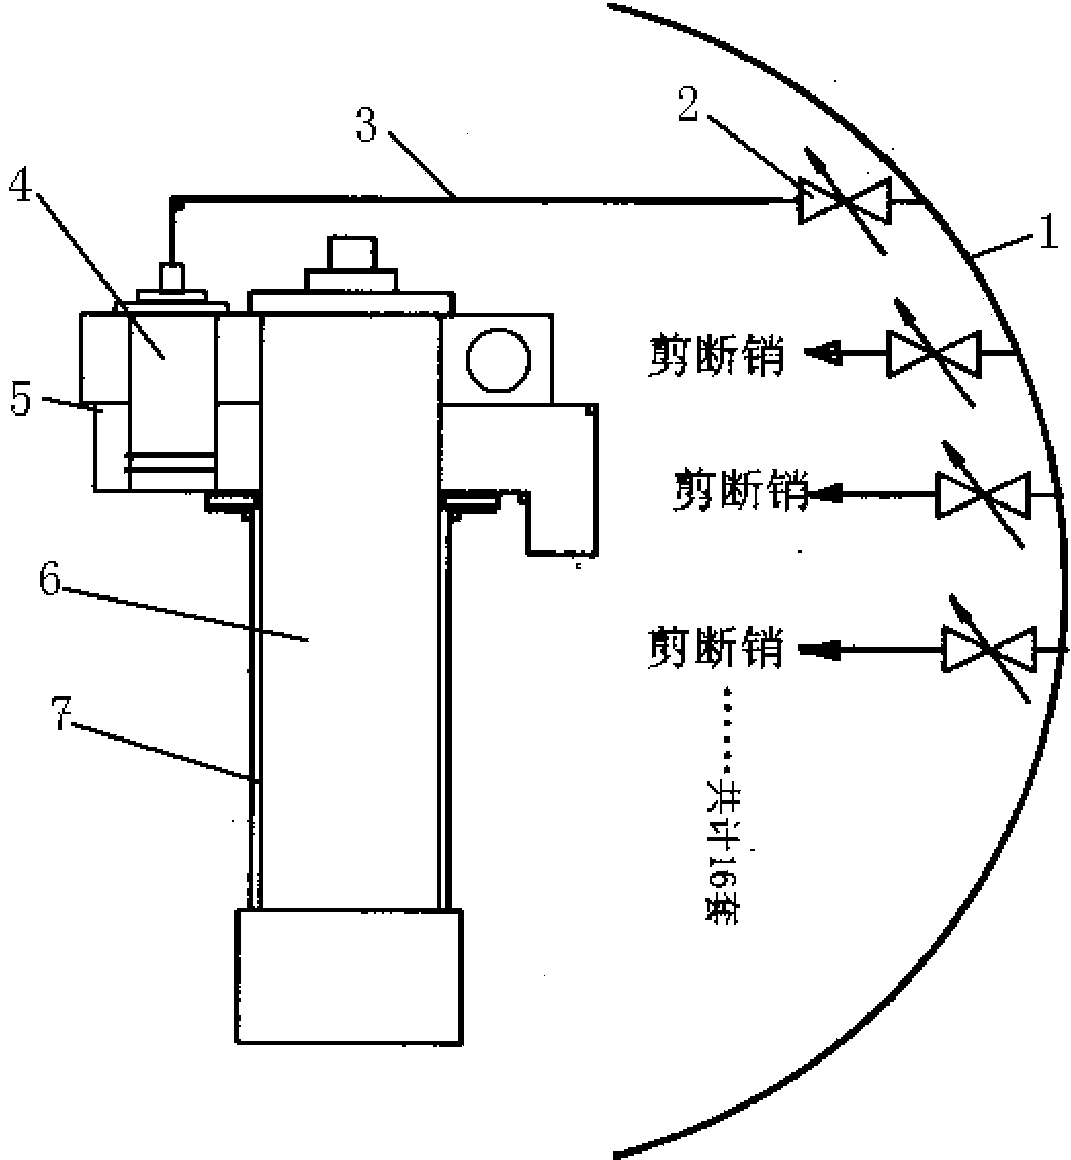 Method for improving troubleshooting efficiency of shear pin system of water turbine